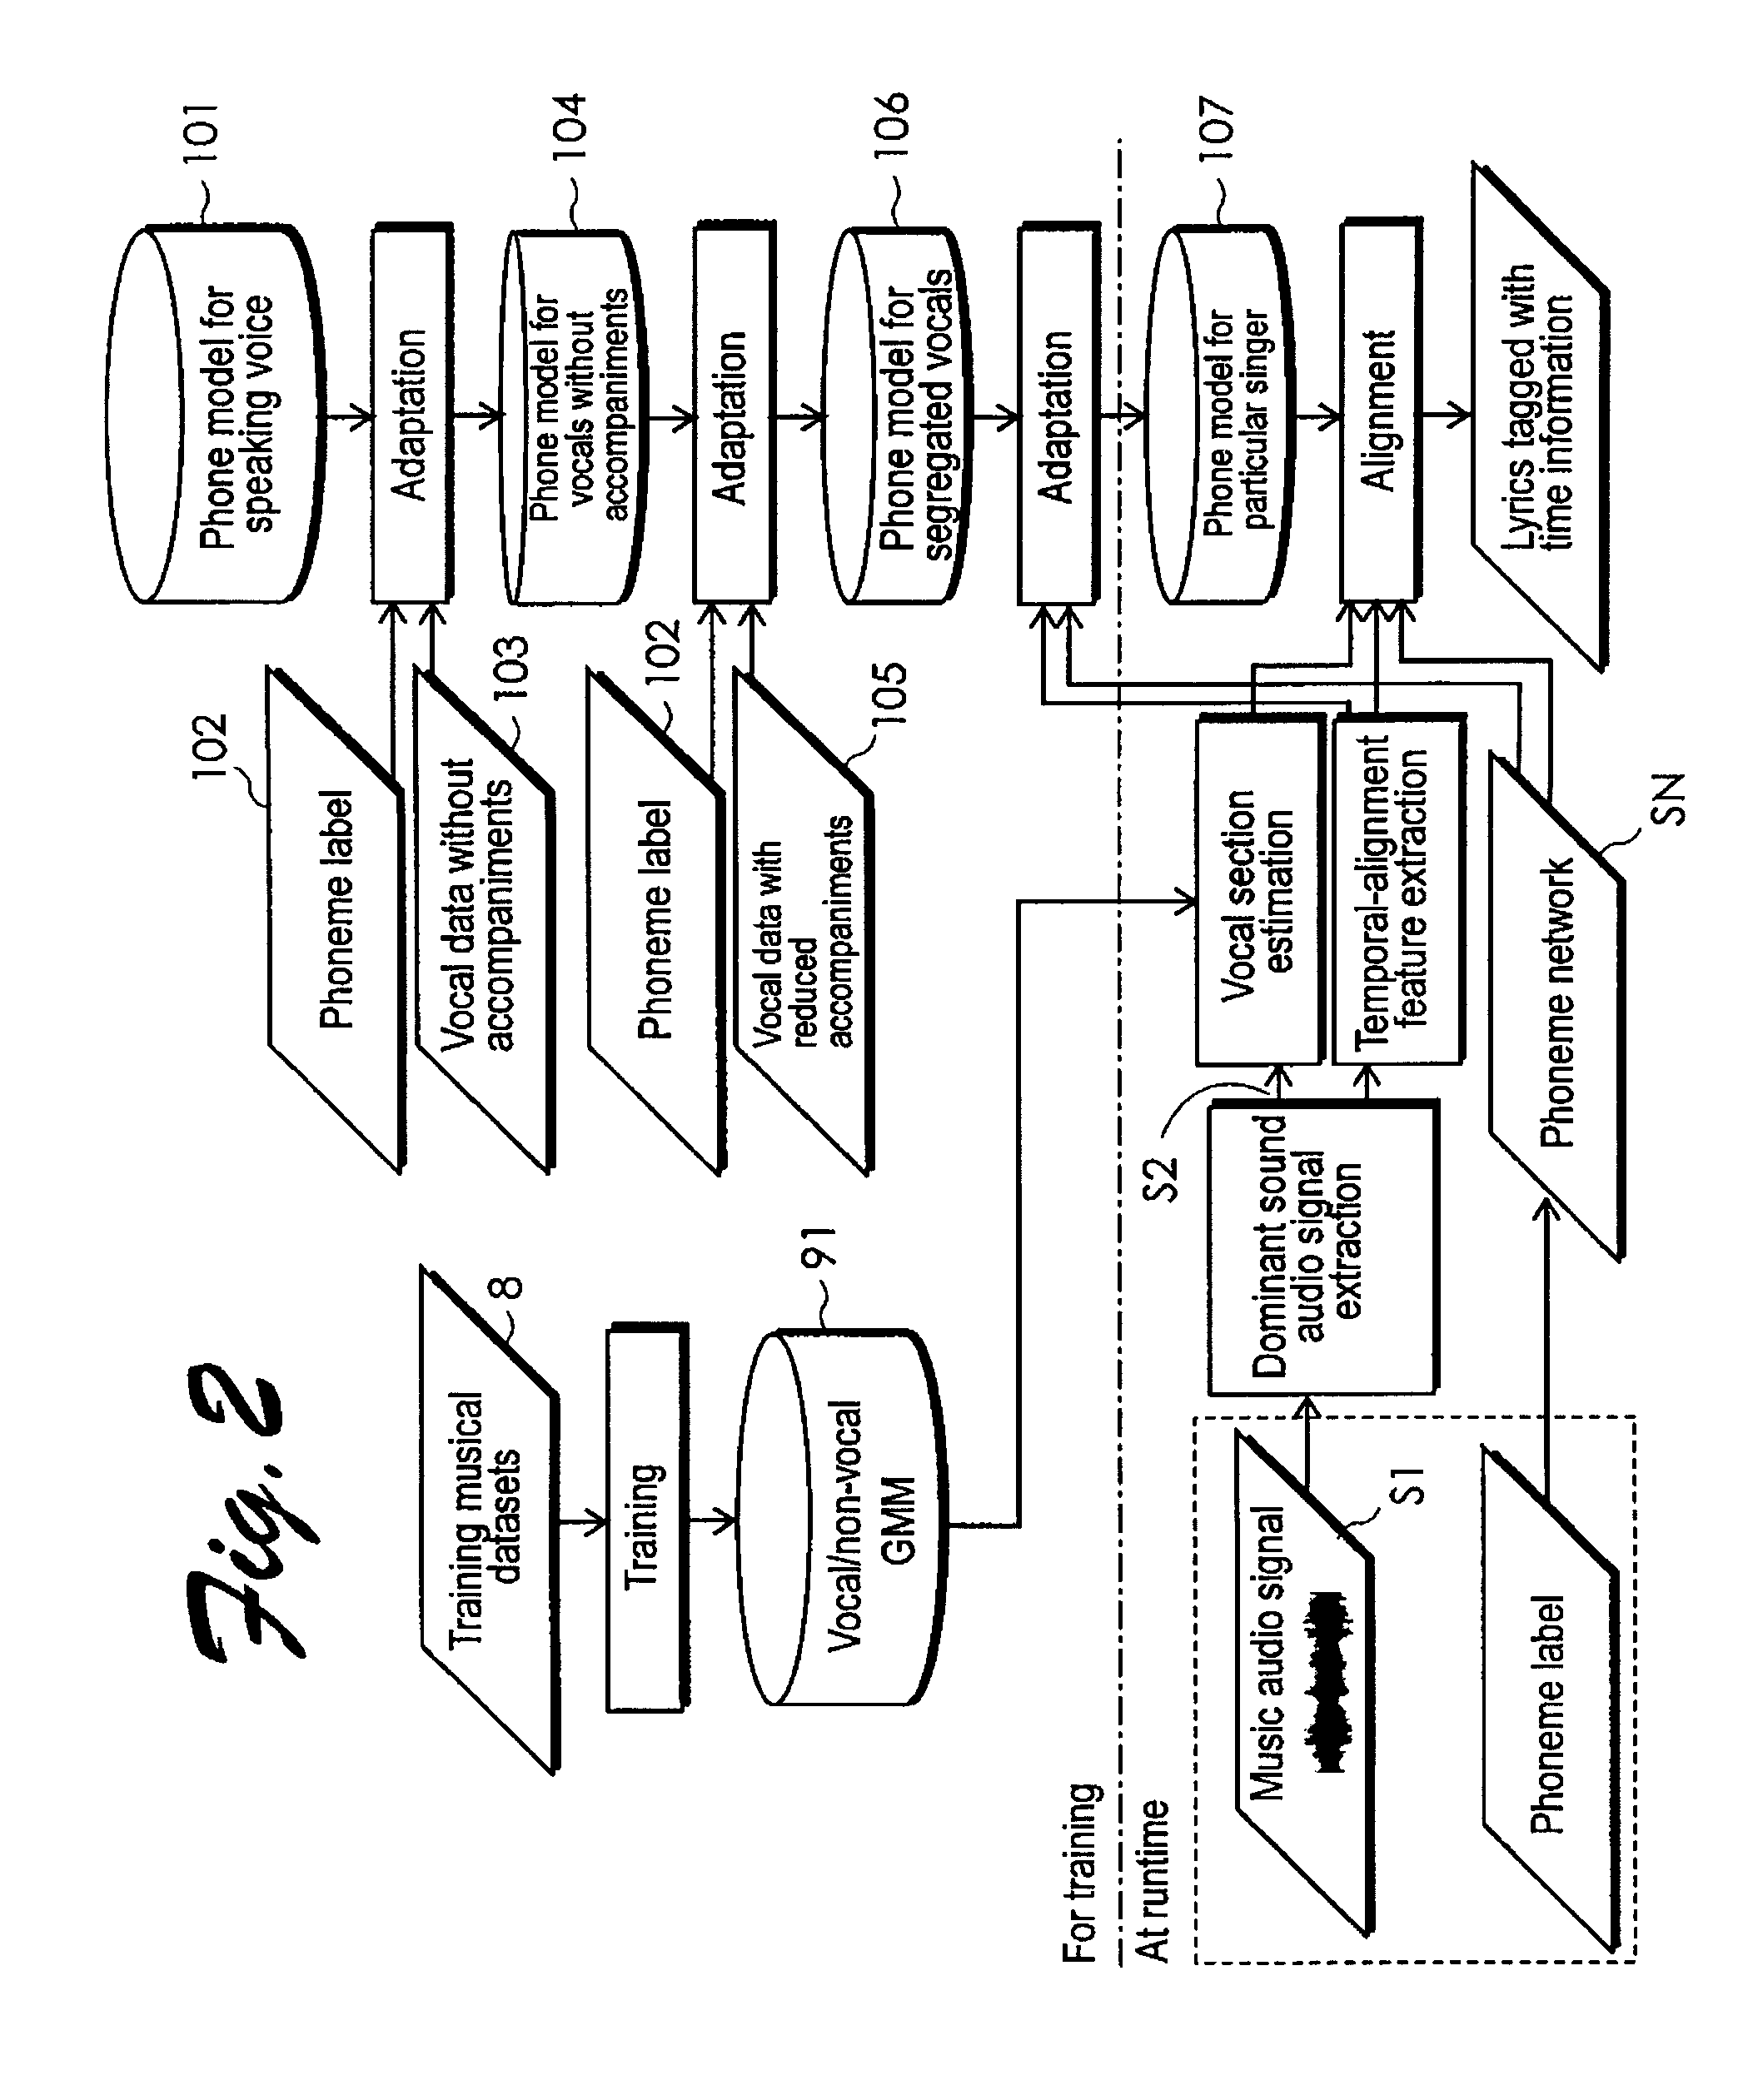 Automatic system for temporal alignment of music audio signal with lyrics